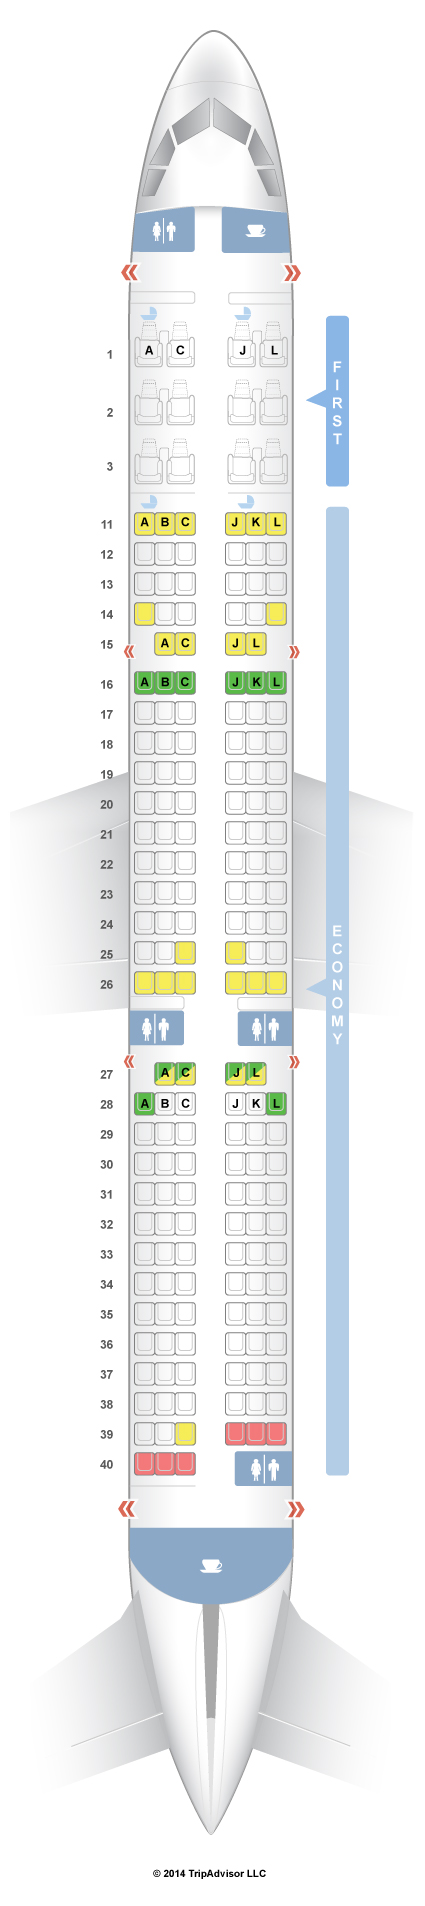 Airbus A321 Delta Seating Chart